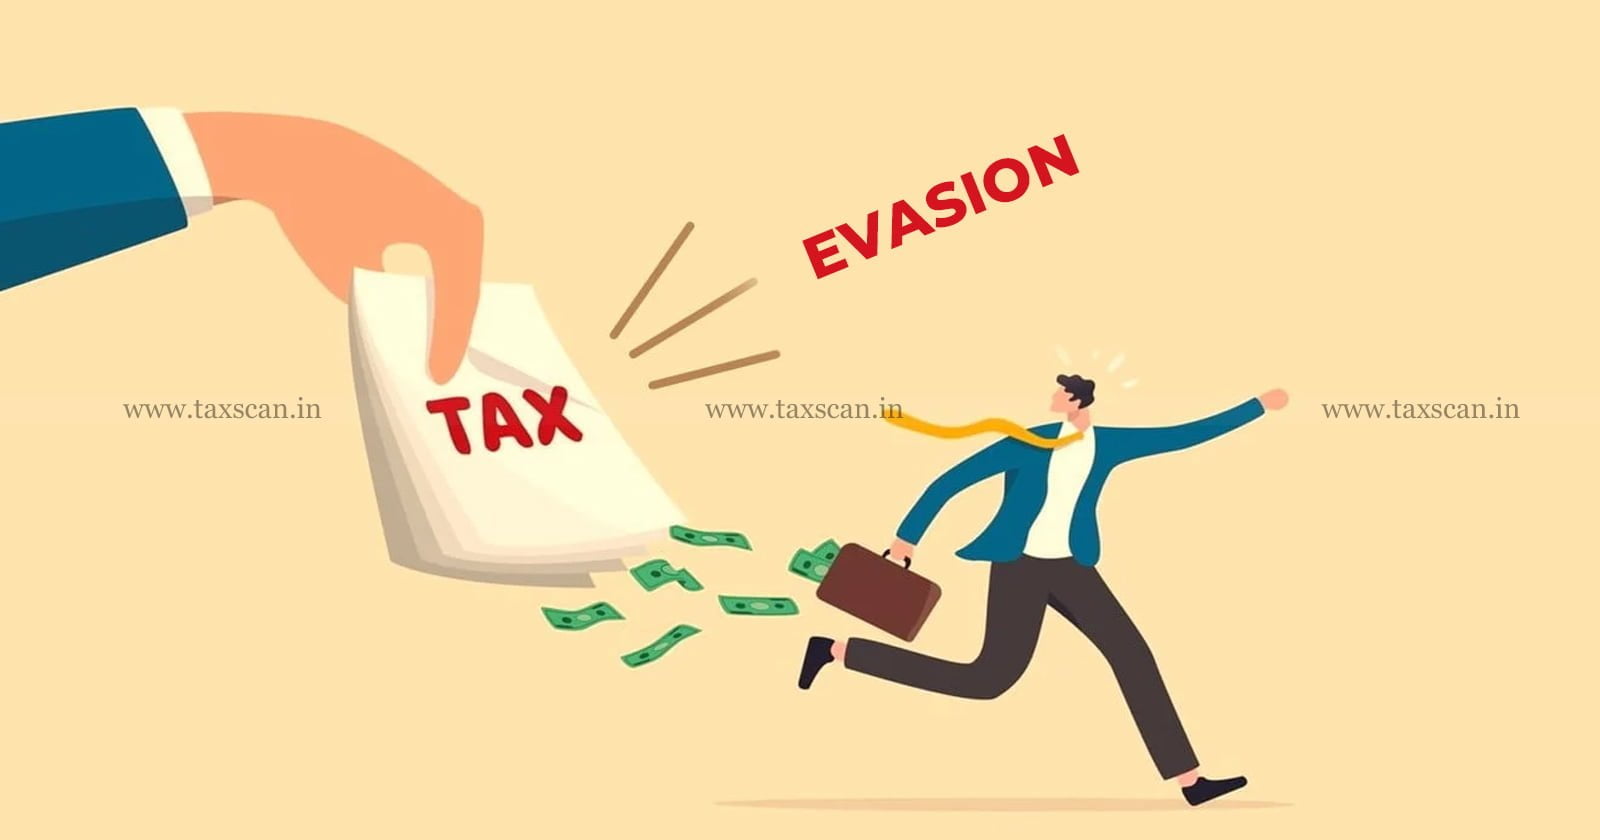 Income Tax - Income Tax Department - Tax Evasion - Gujarat tax evasion - Income tax evasion Gujarat - taxscan